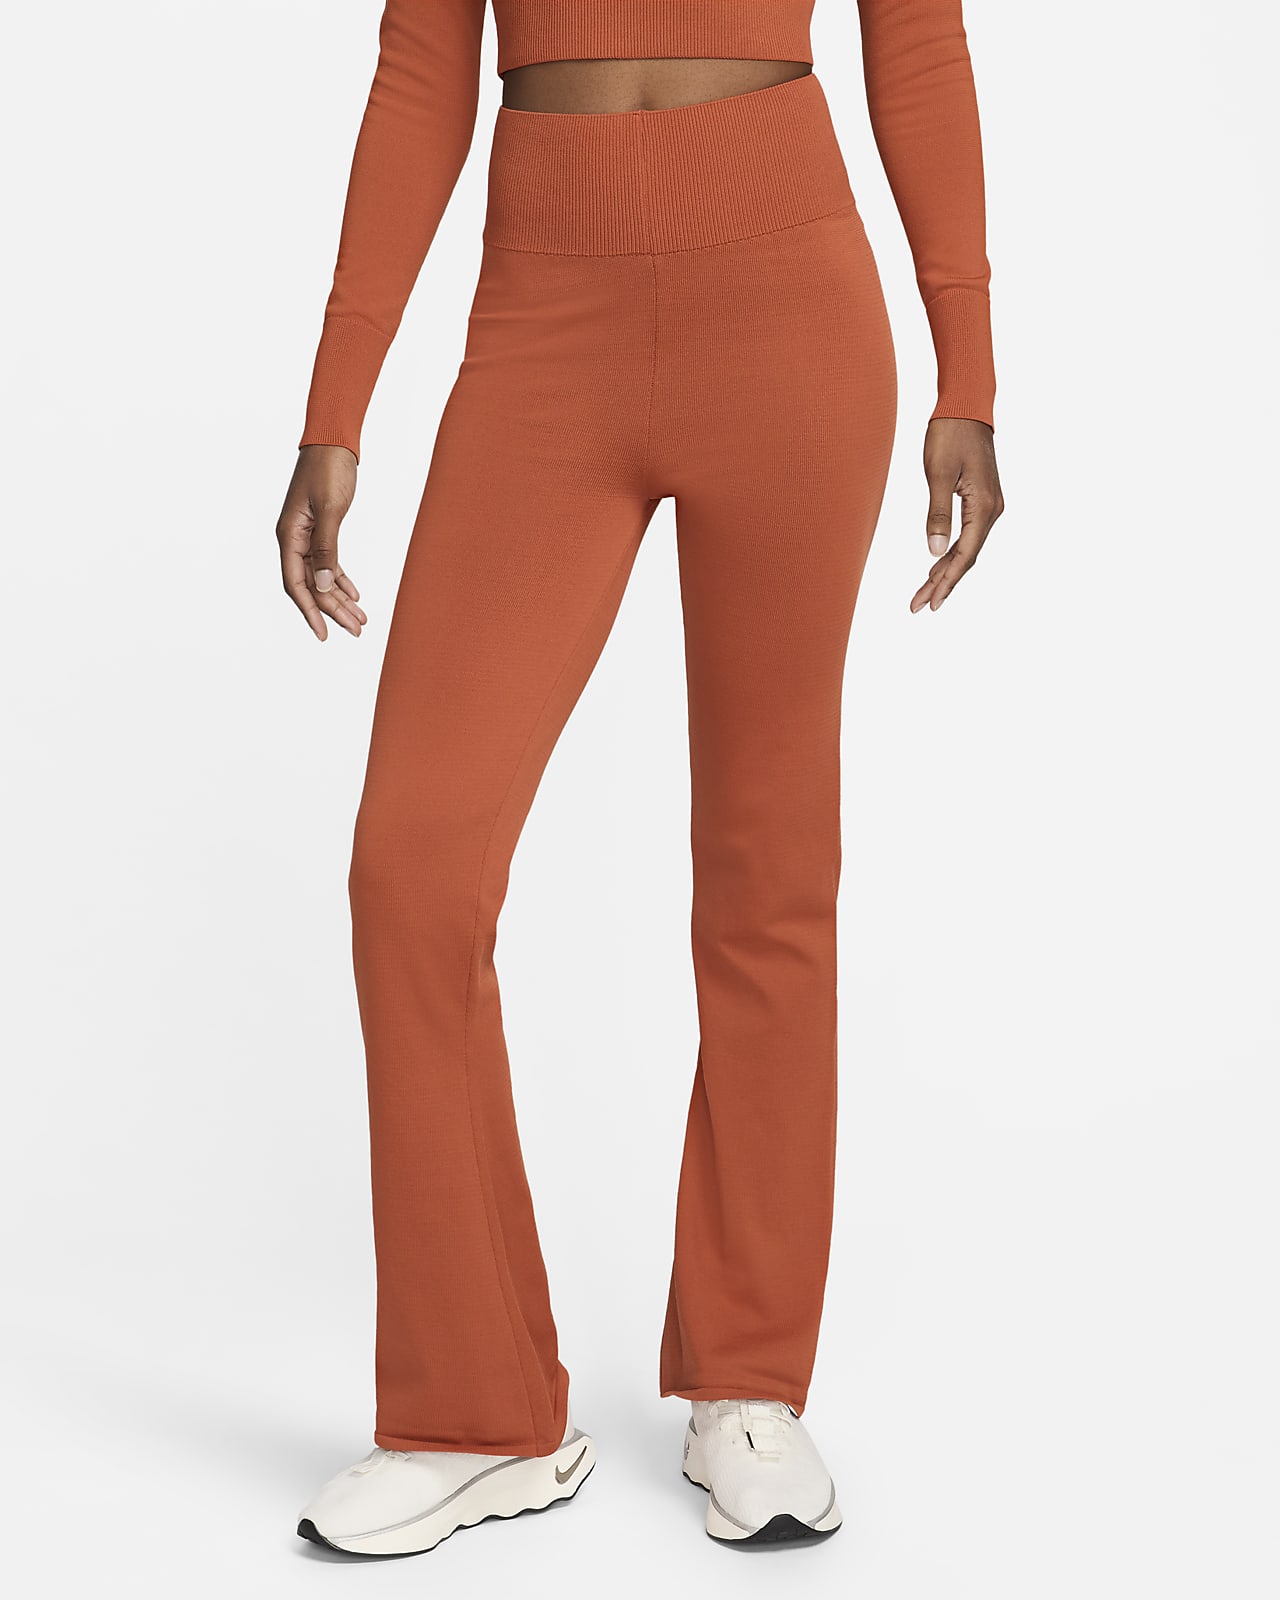 Nike Sportswear Chill Knit Women's Tight High-Waisted Jumper-Knit Flared Trousers